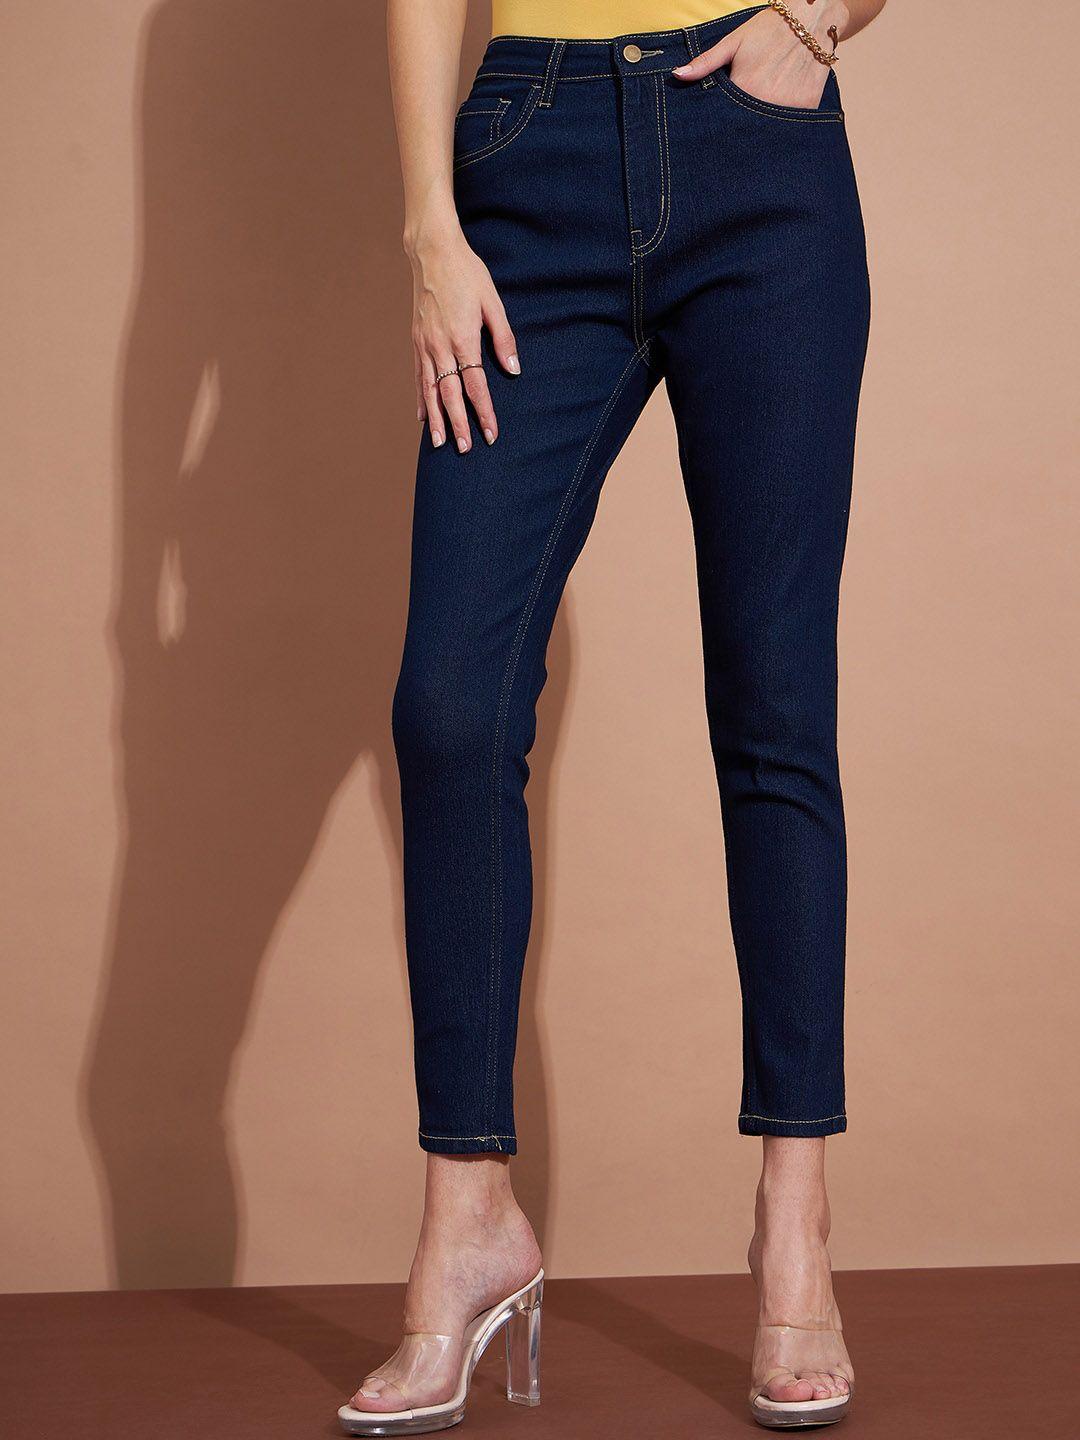 dressberry-women-skinny-fit-mid-rise-stretchable-jeans